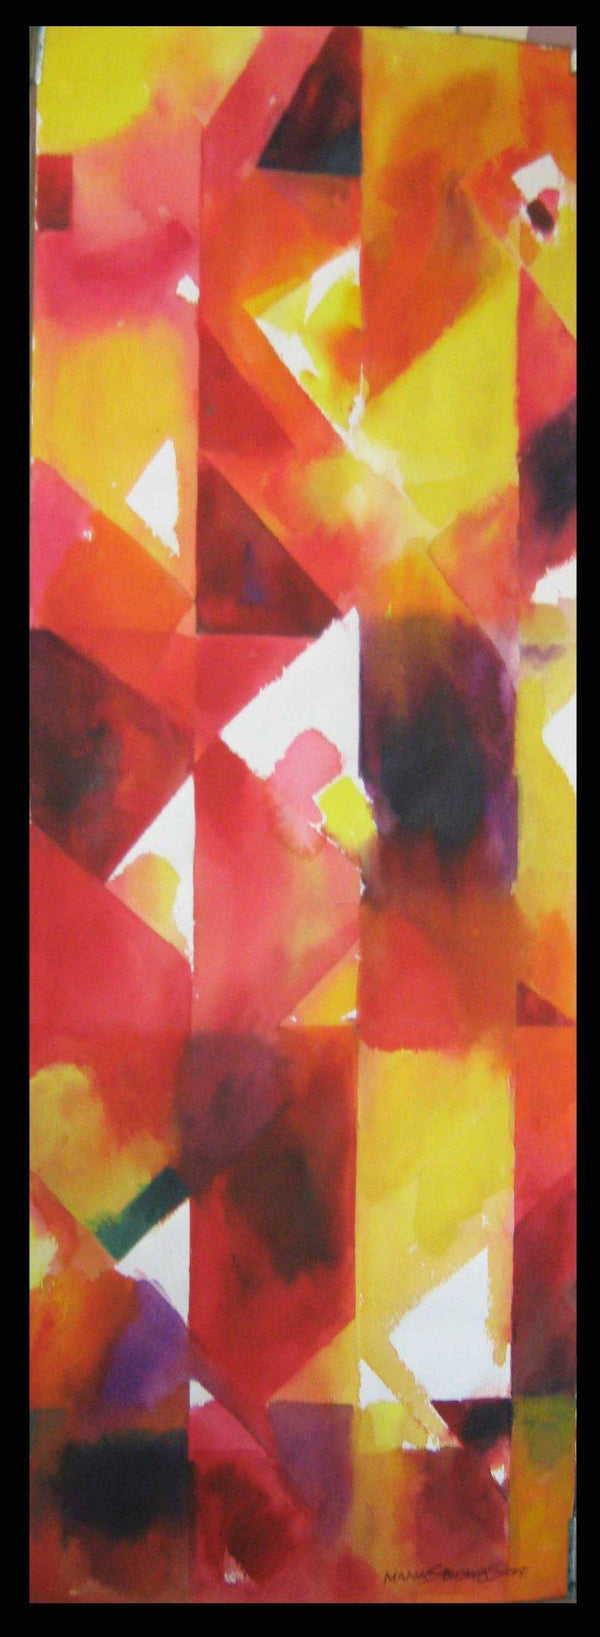 Light And Shead Painting by Manas Biswas | ArtZolo.com